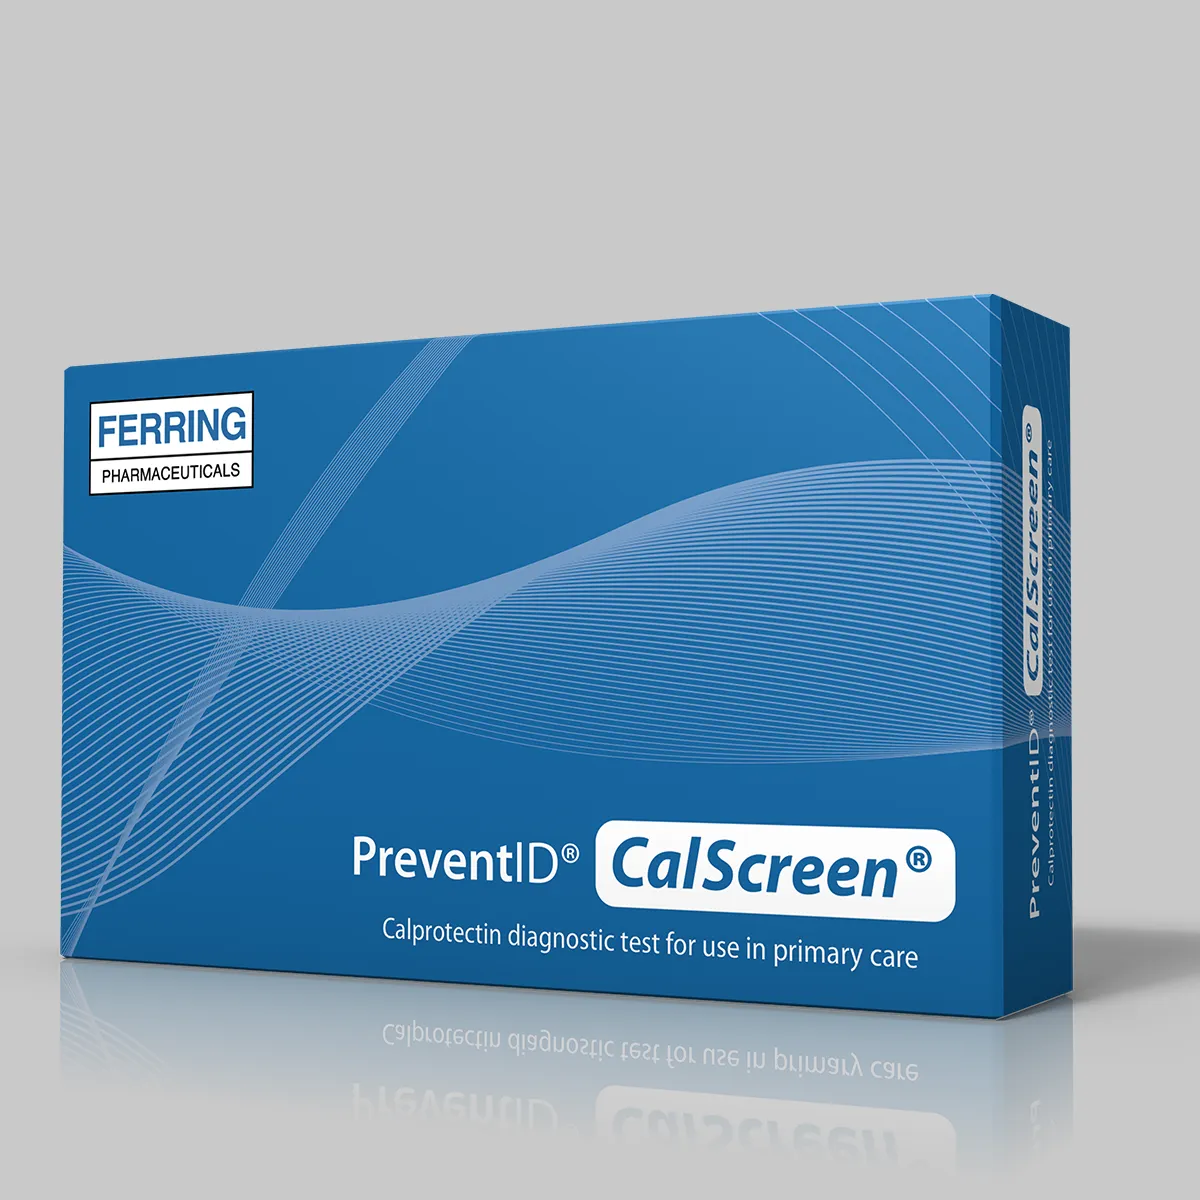 Calscreen packaging for Ferring